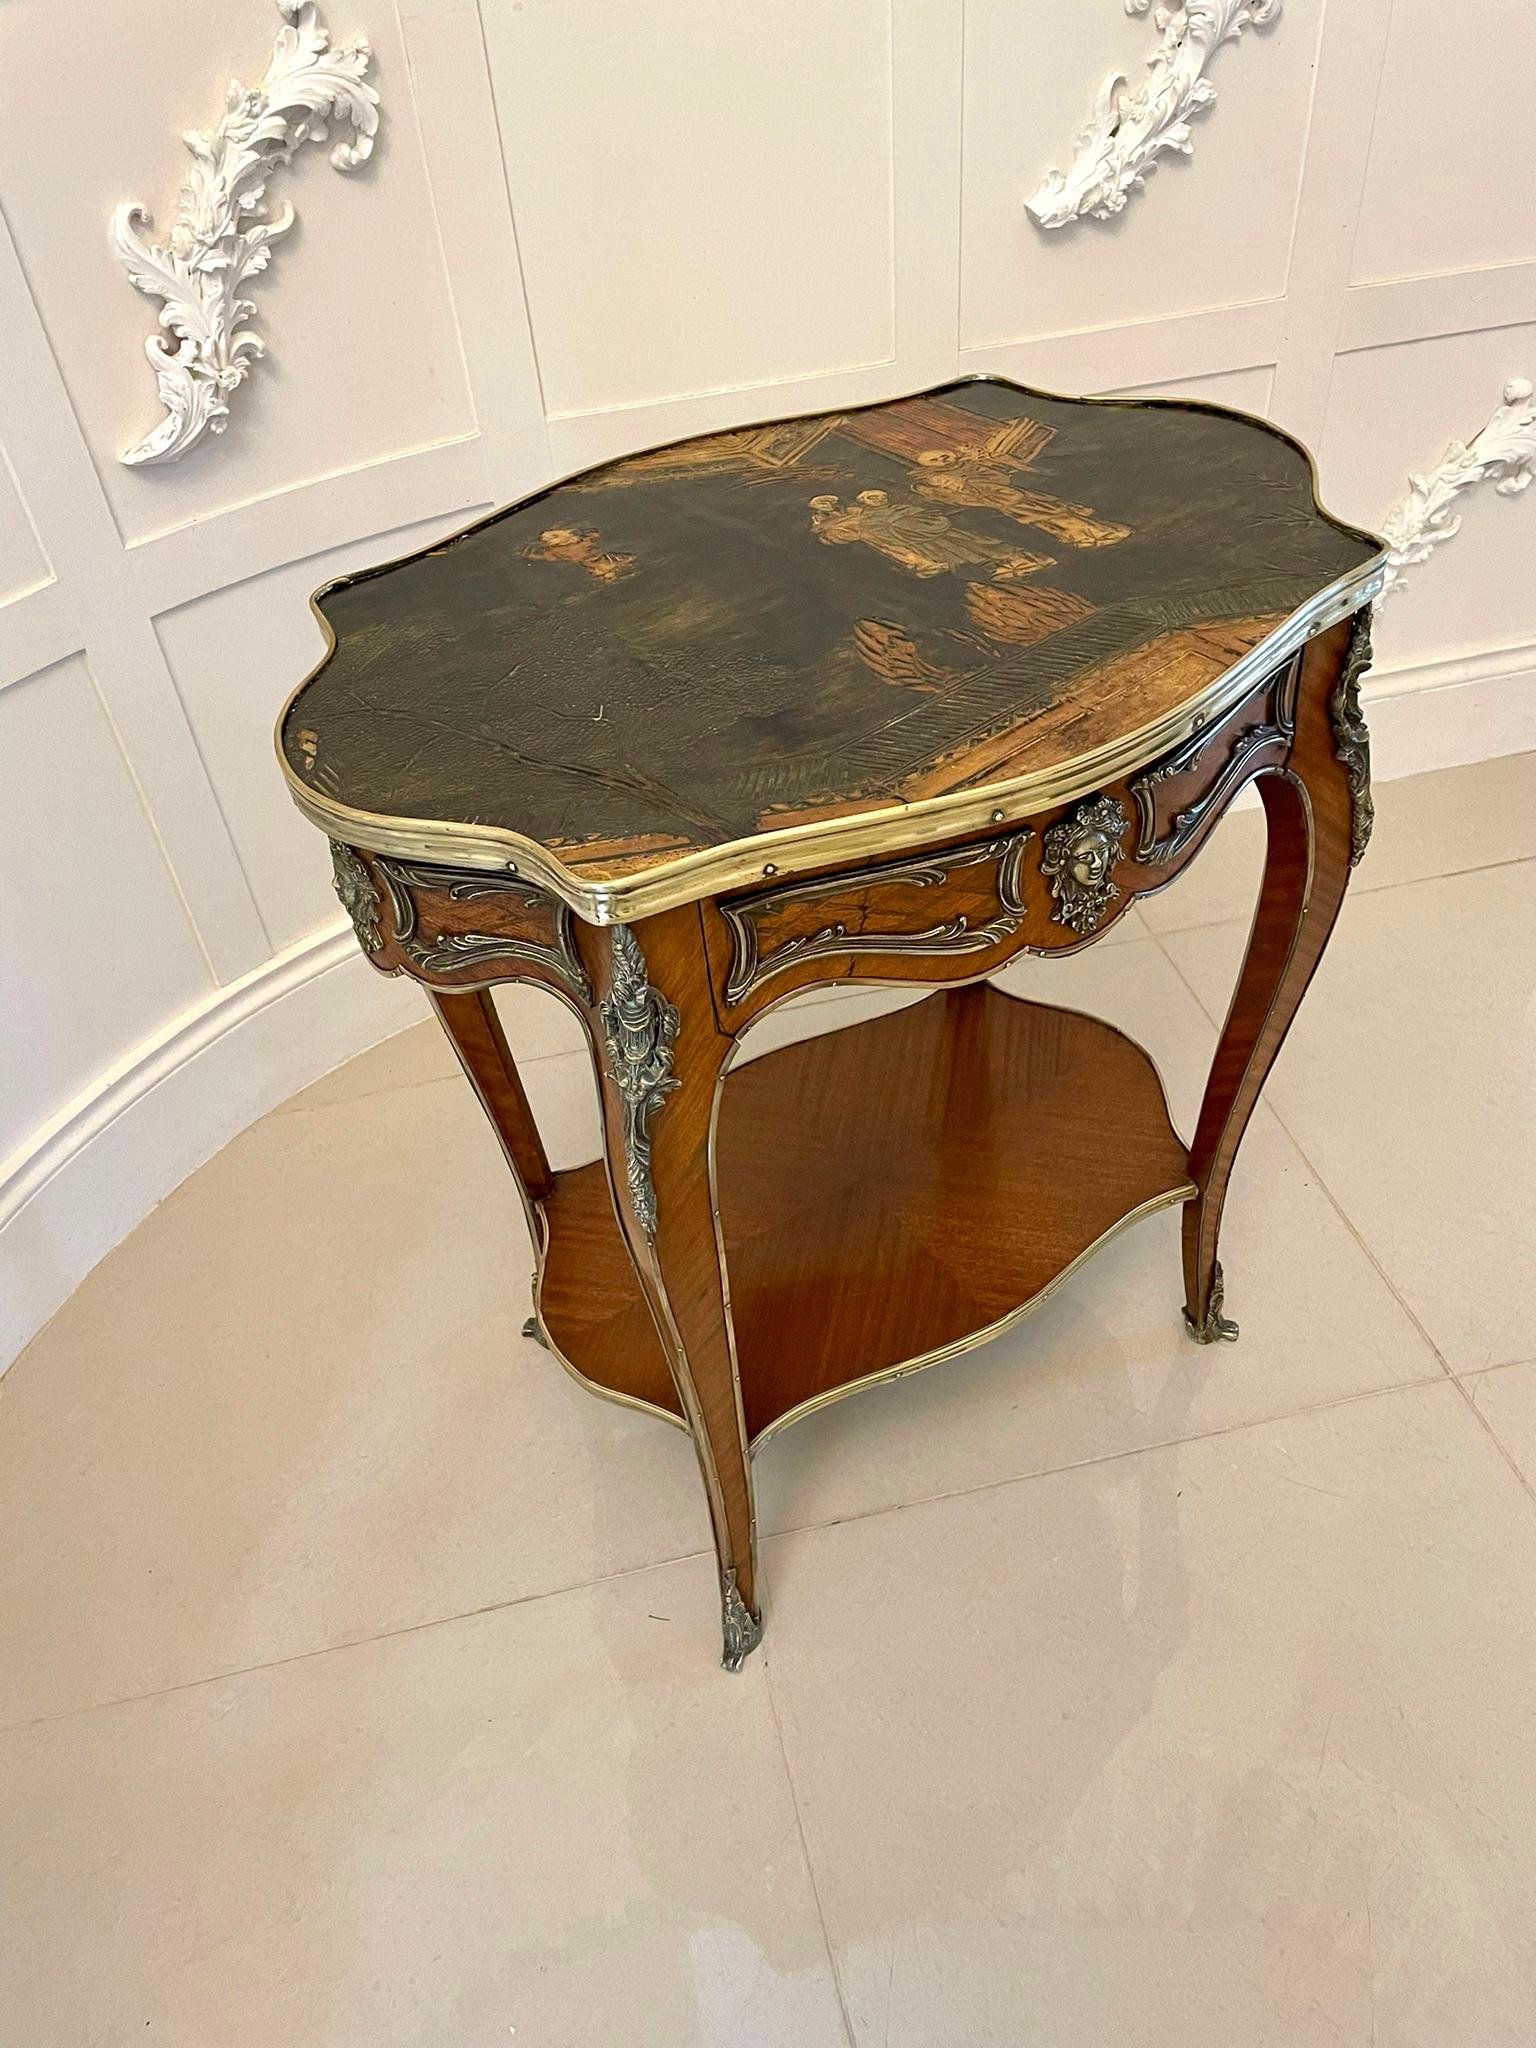 Victorian Outstanding Antique French Kingwood and Ormolu Mounted Freestanding Centre Table For Sale